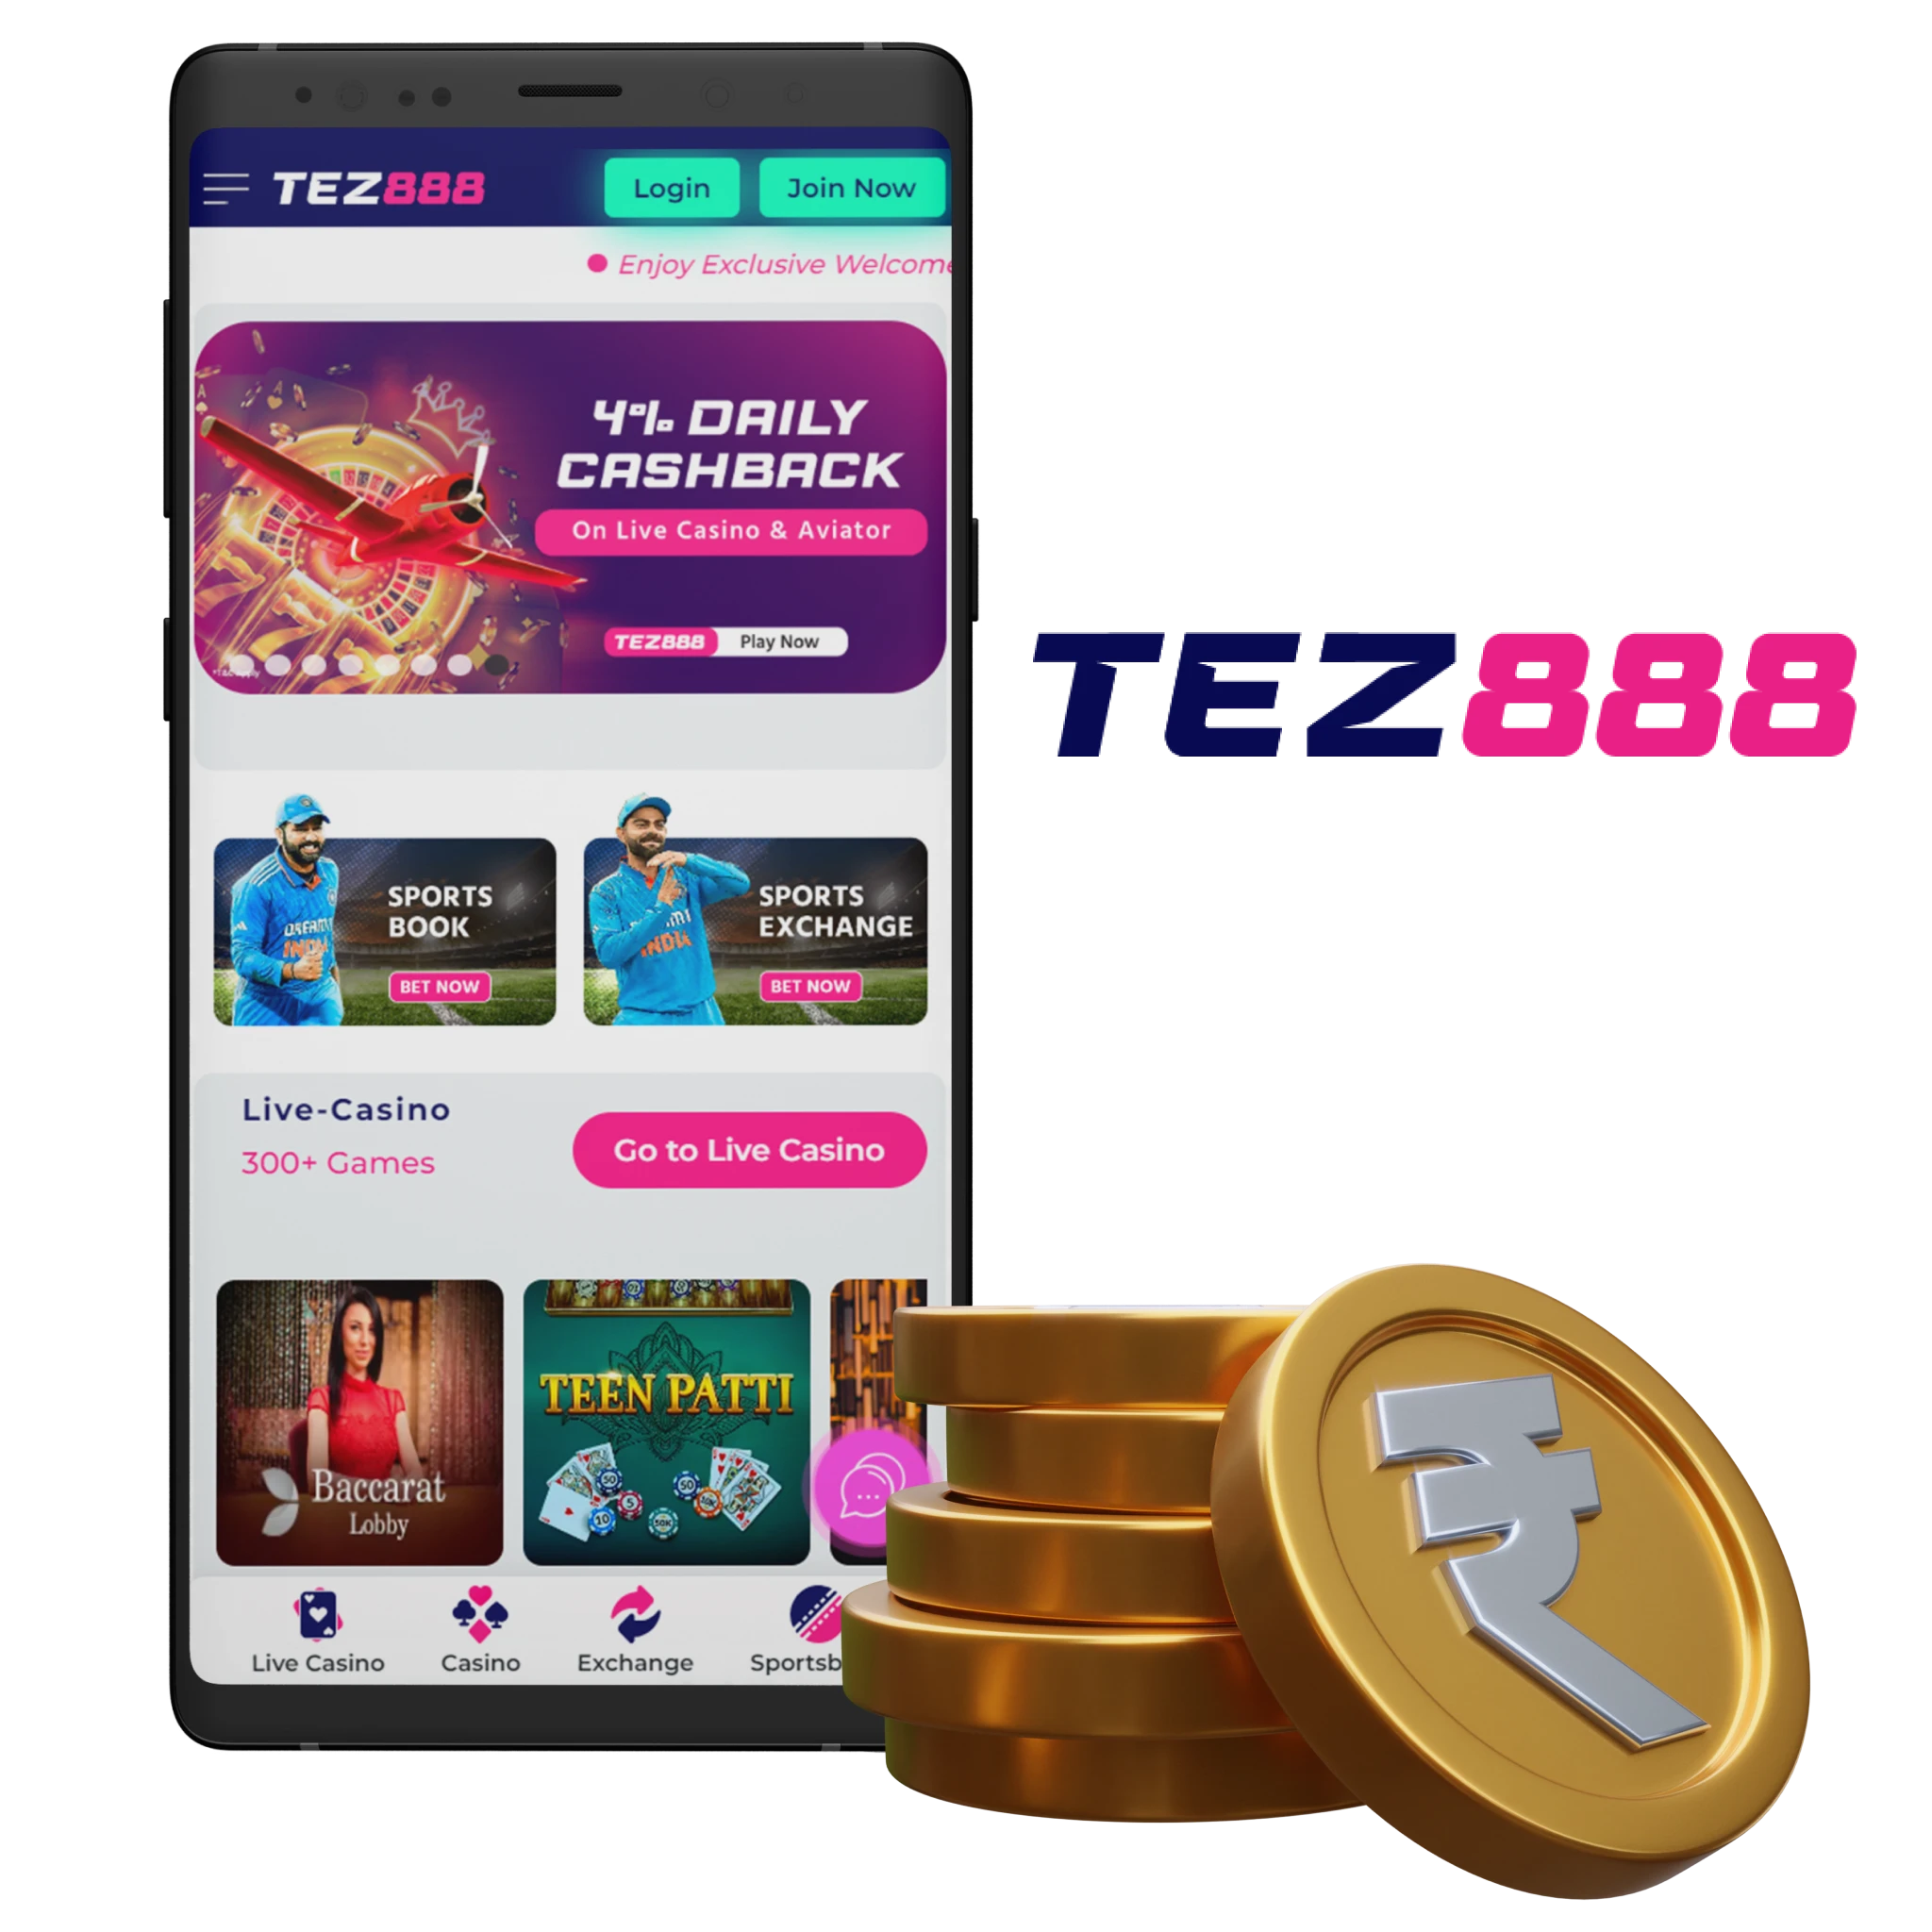 Tez888 app offers a comprehensive gambling participation with its accessible interface and extensive features.